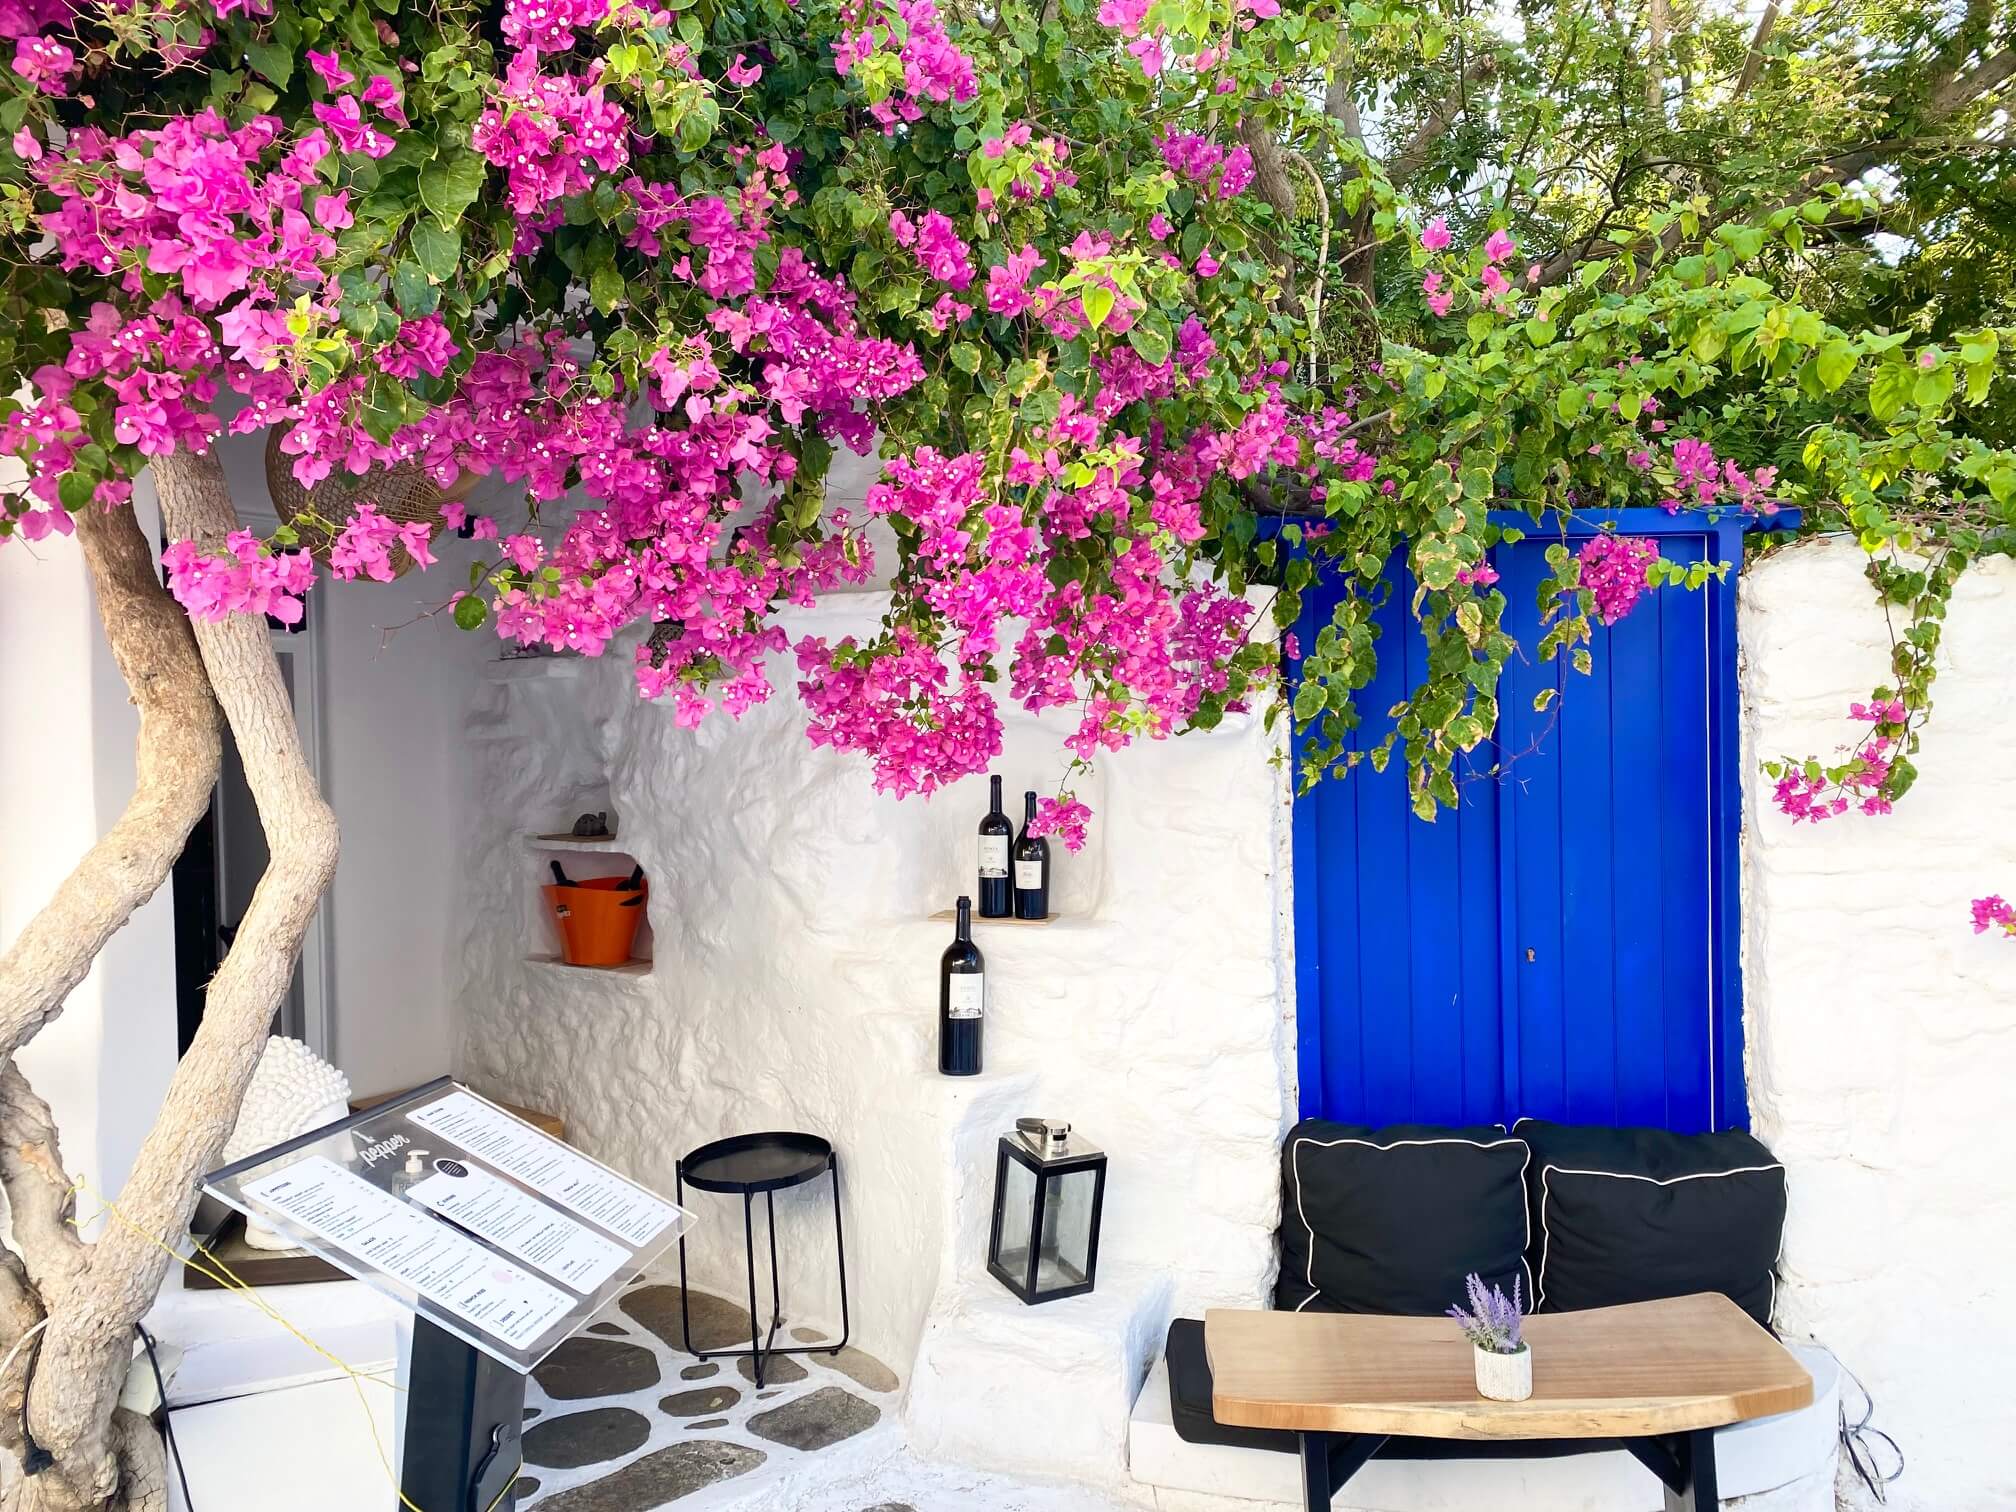 Get Around Mykonos Easily: Travel the Famous Island